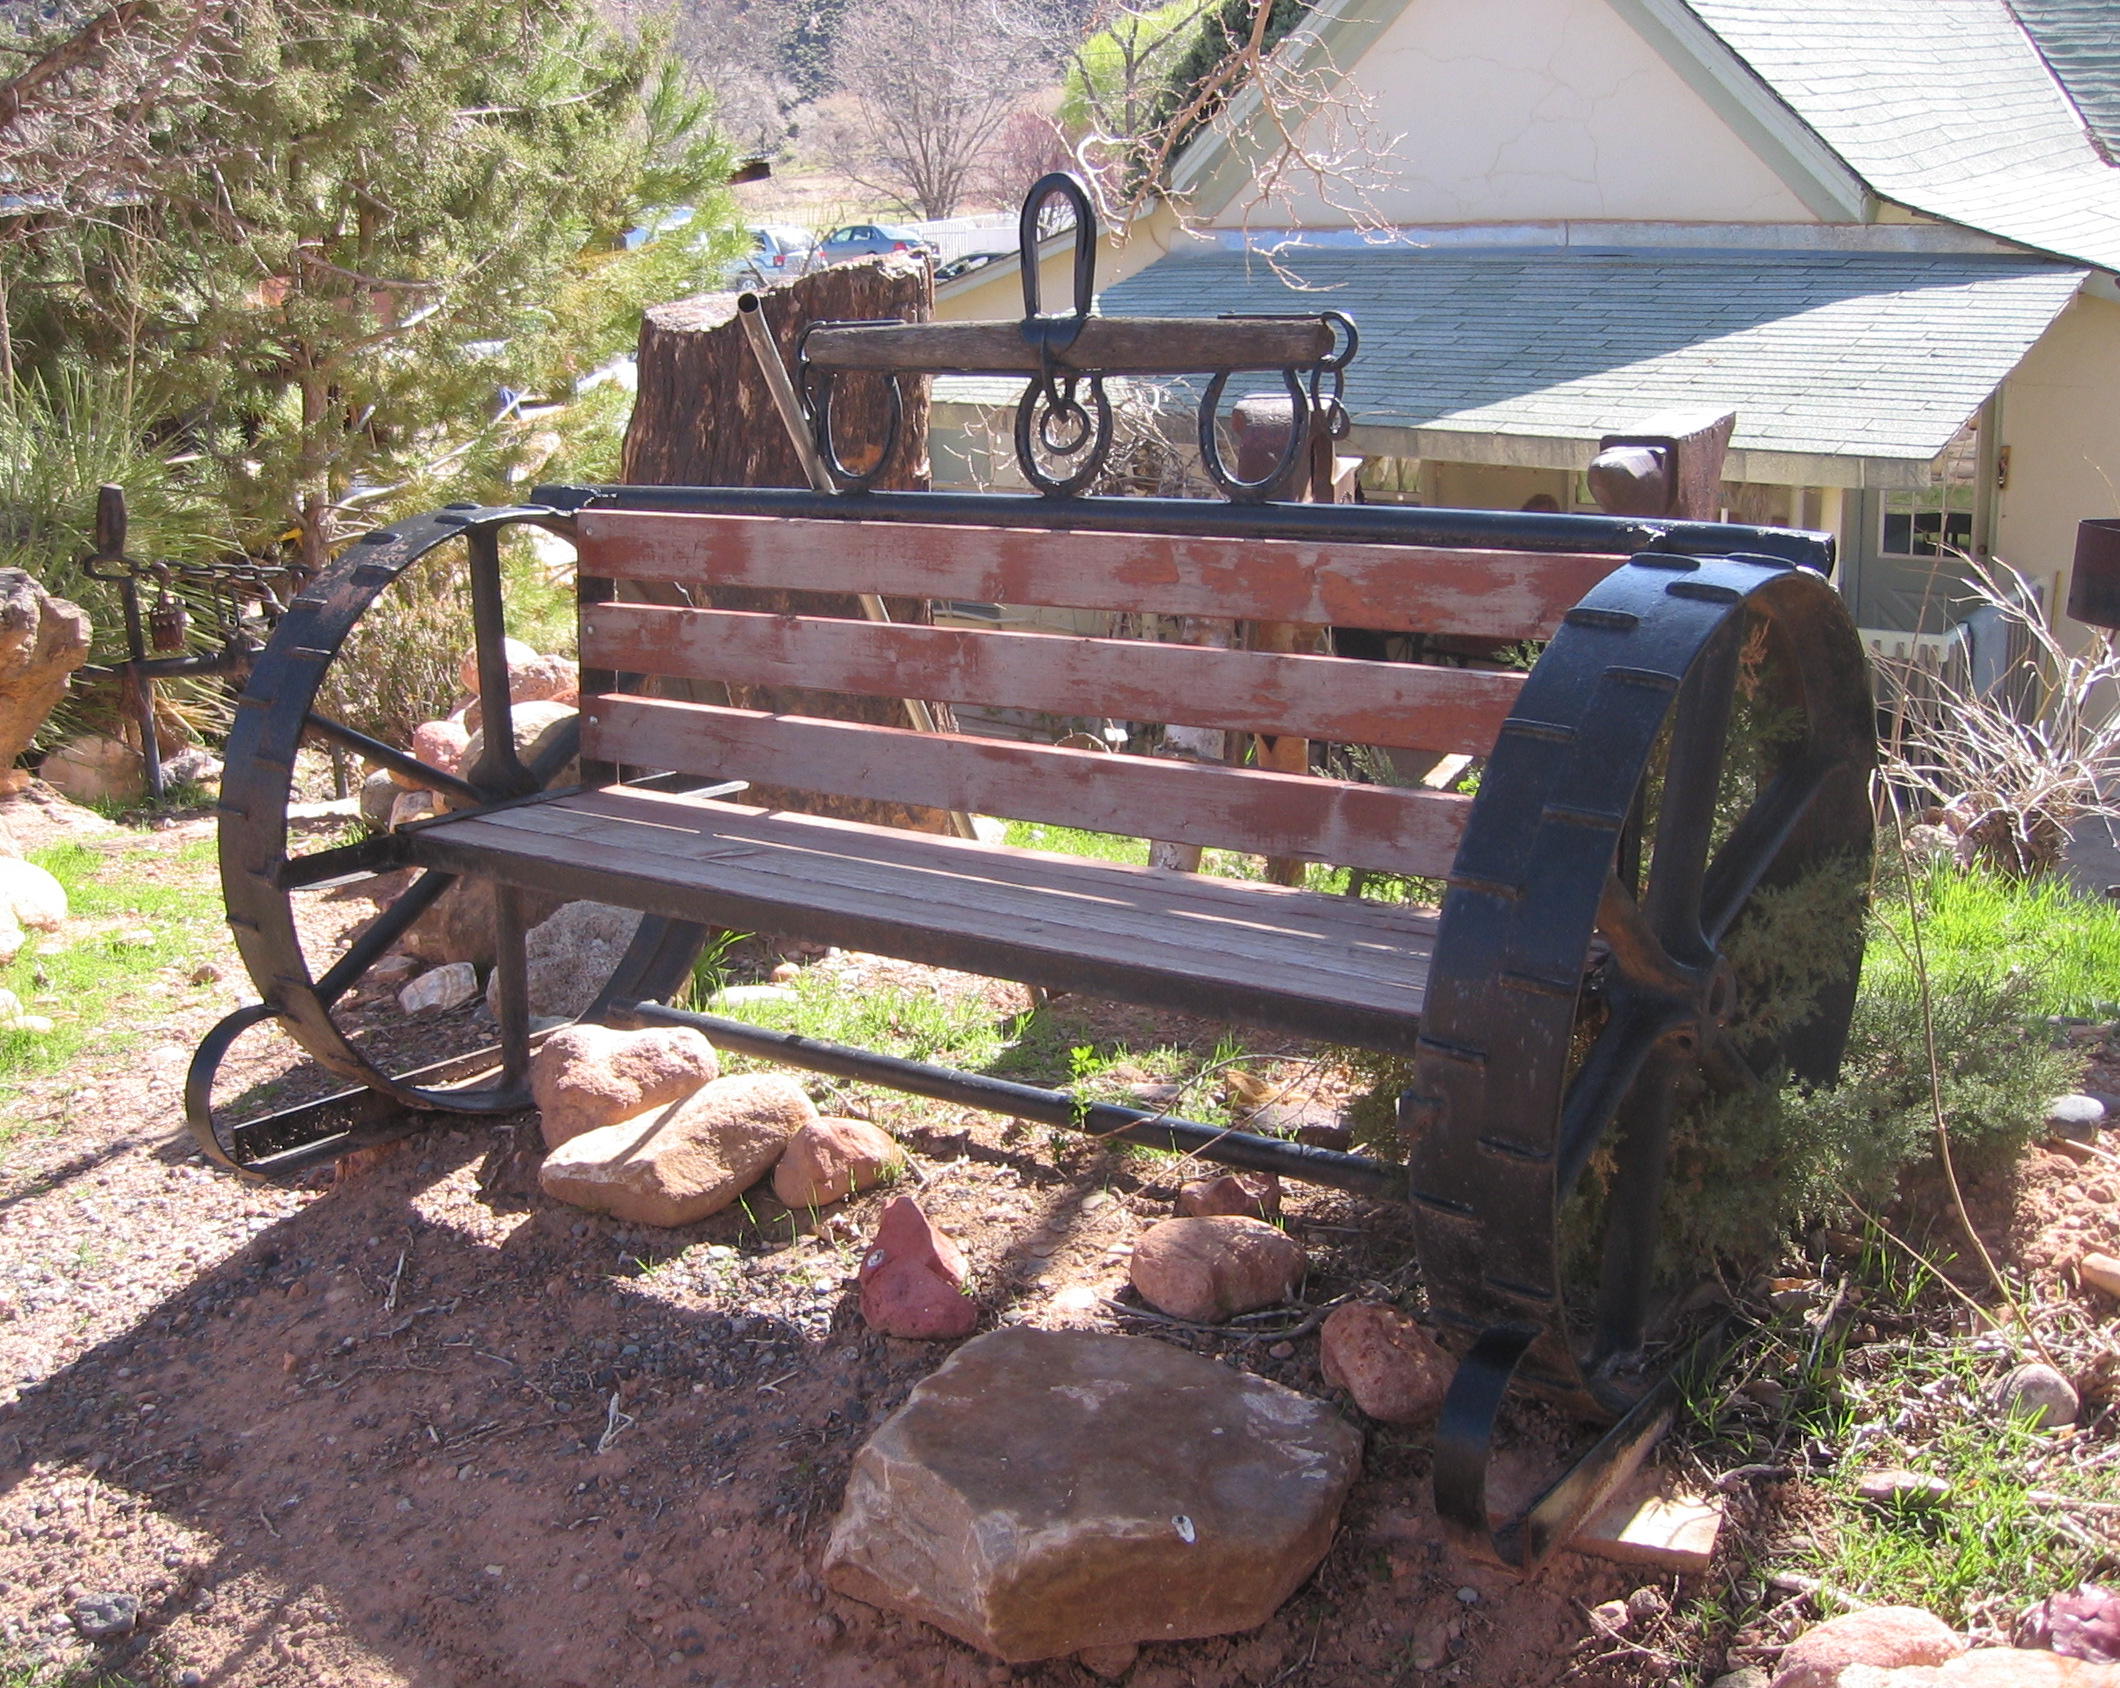 Decorative bench at the Milt Holt home